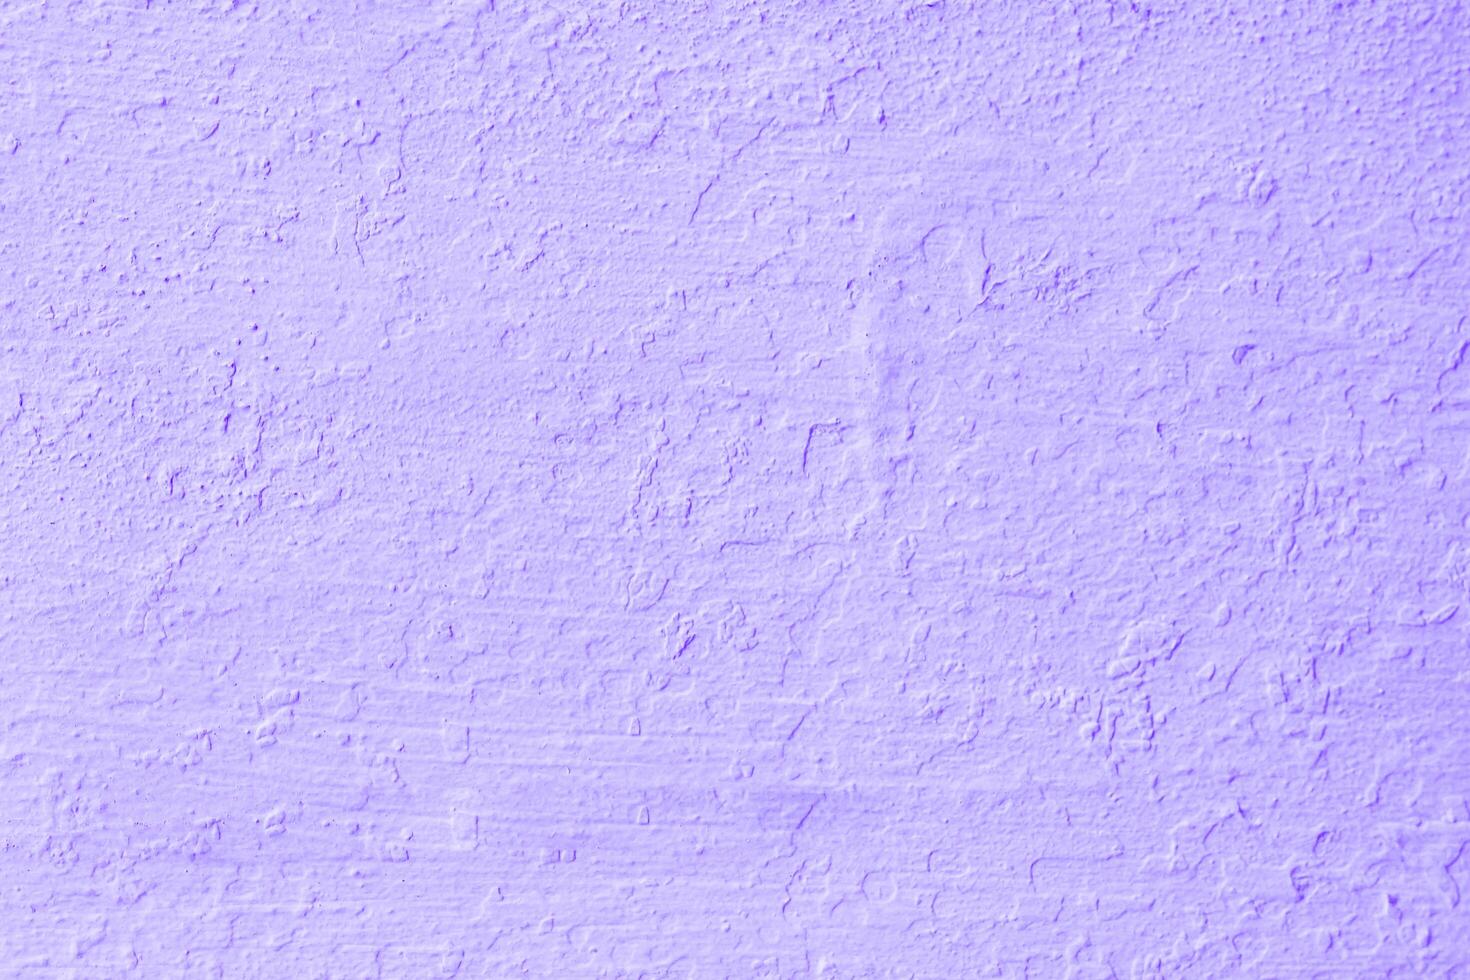 Purple cement walls or Mortar are not smooth and crack surface vintage style for design work background texture and copy space photo